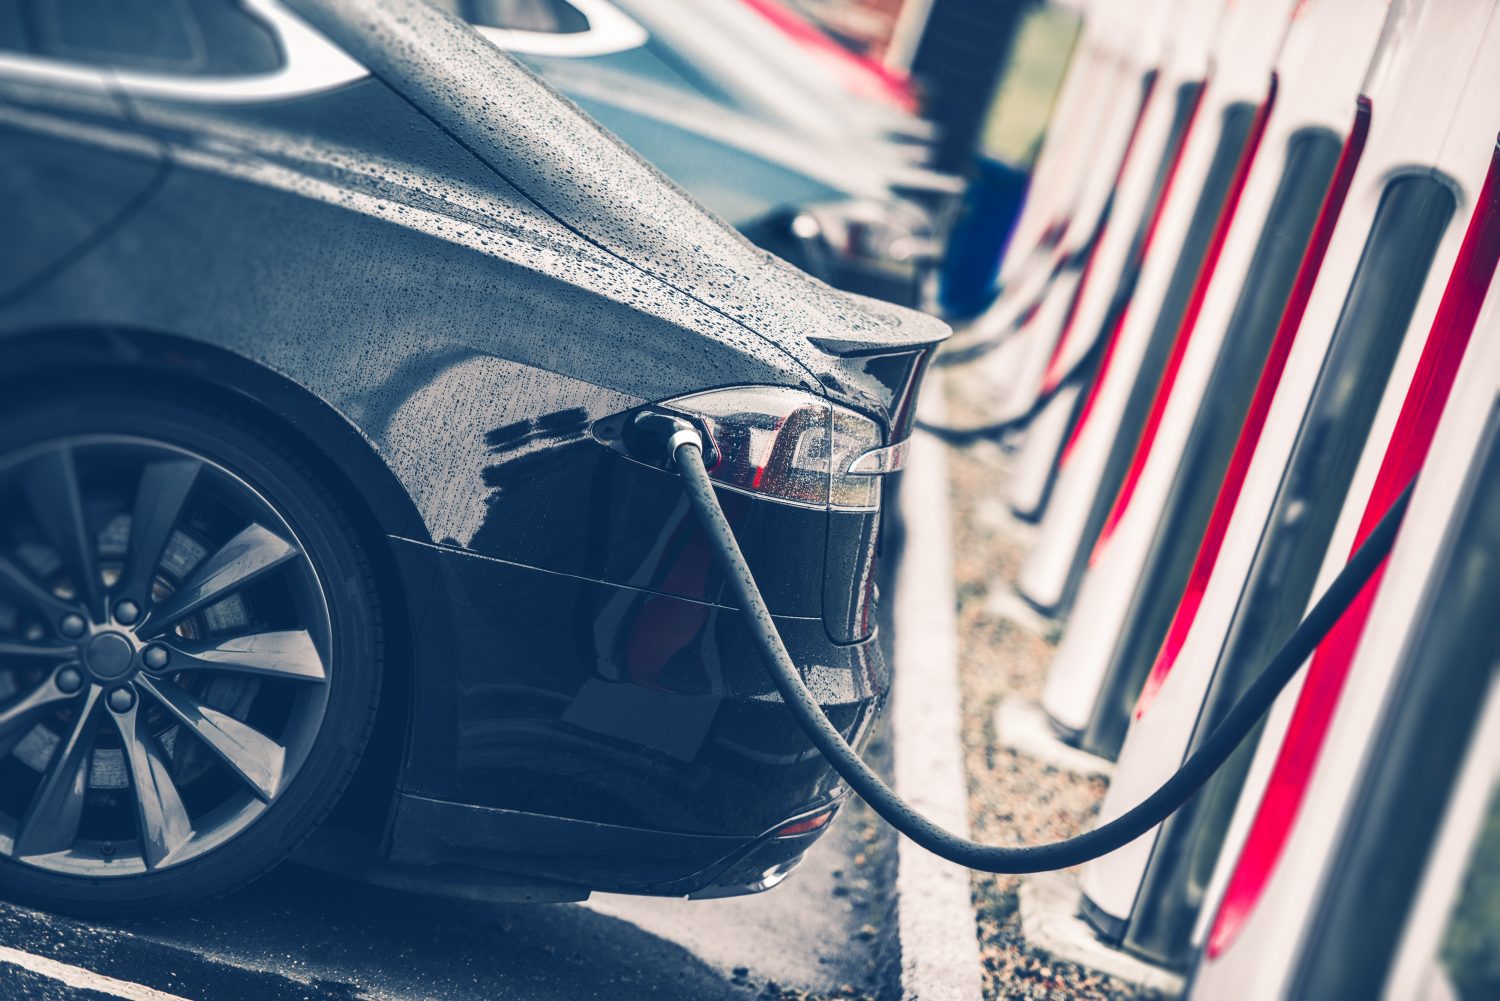 Looking beyond the initial purchase price, the real-world ownership costs of EVs start to paint a different picture for consumers.